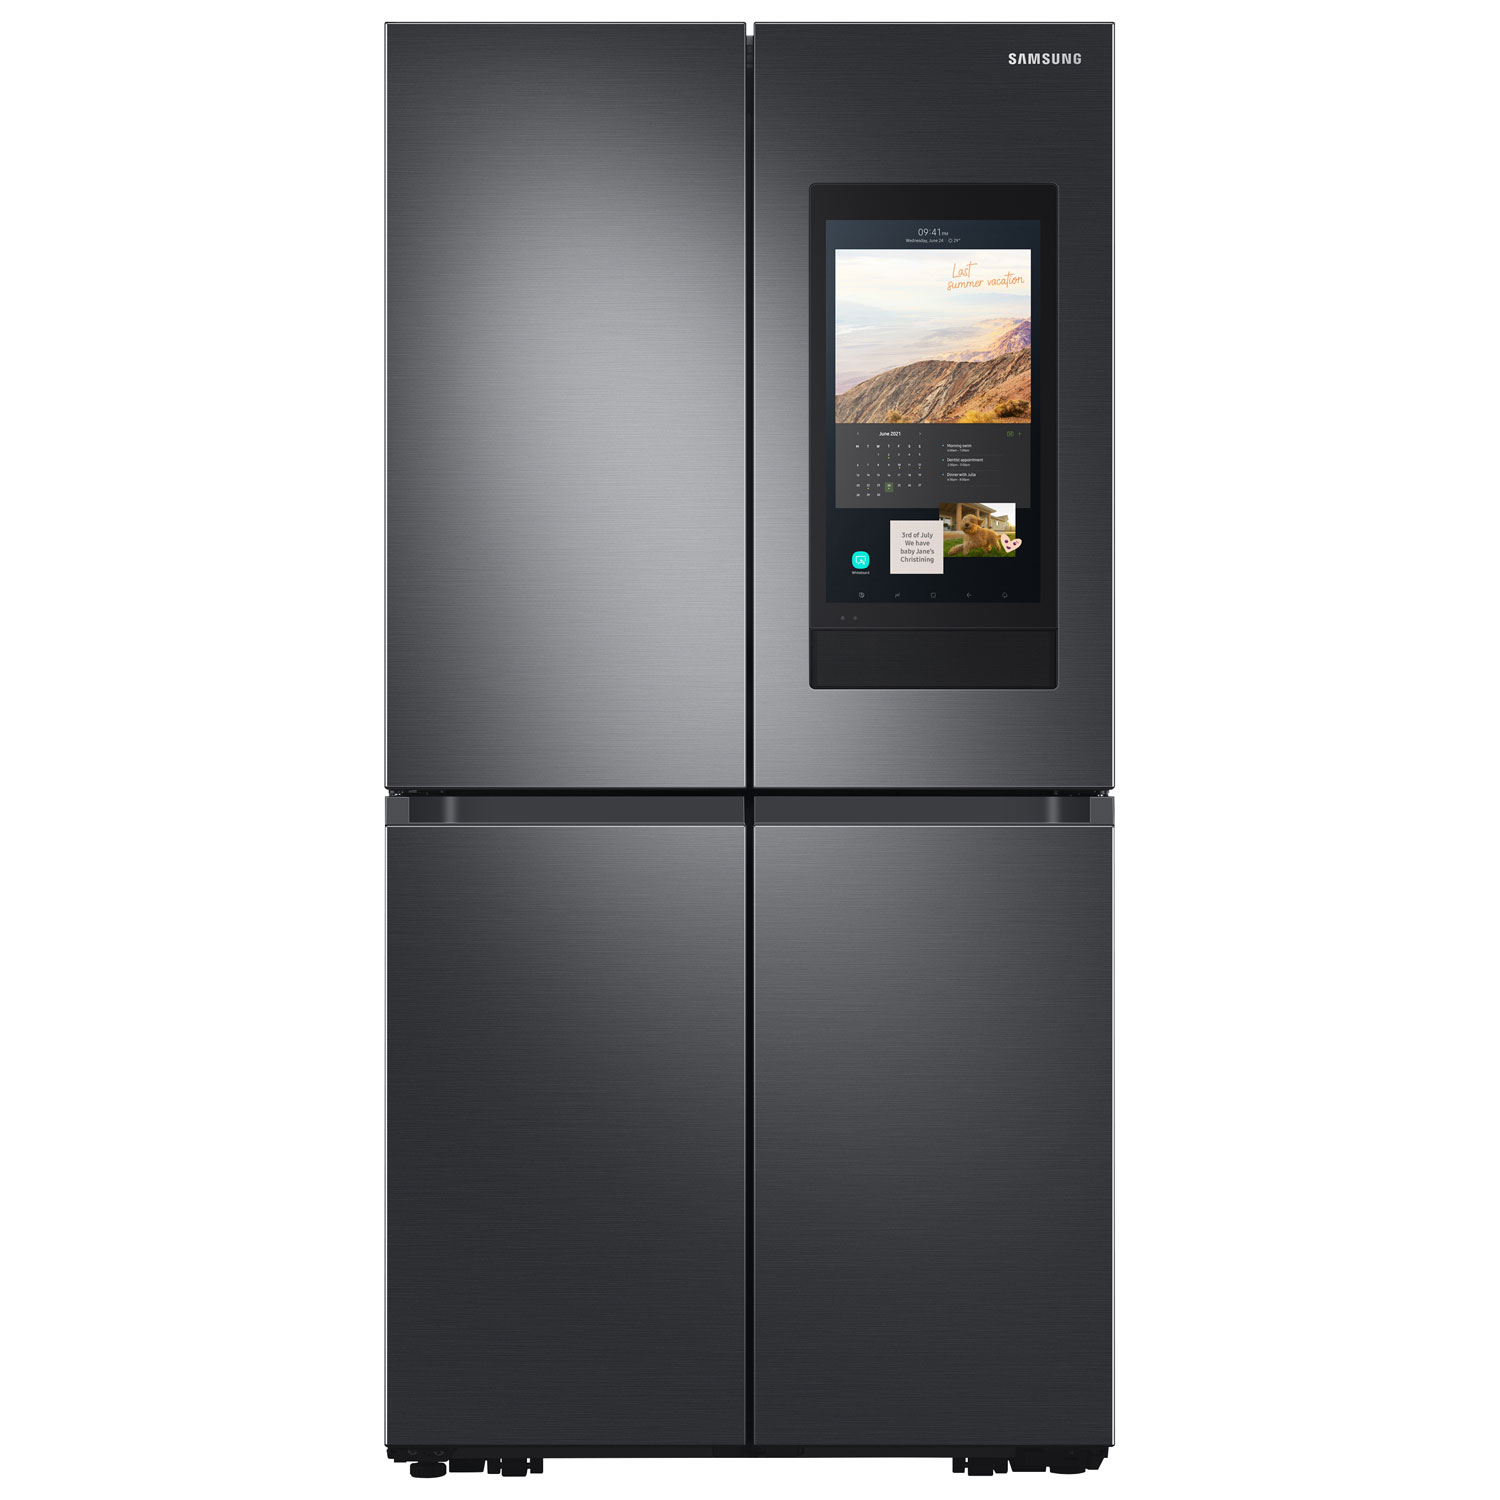 Samsung Family Hub 36" 29 Cu. Ft. French Door Refrigerator (RF29A9771SG) - Black Stainless